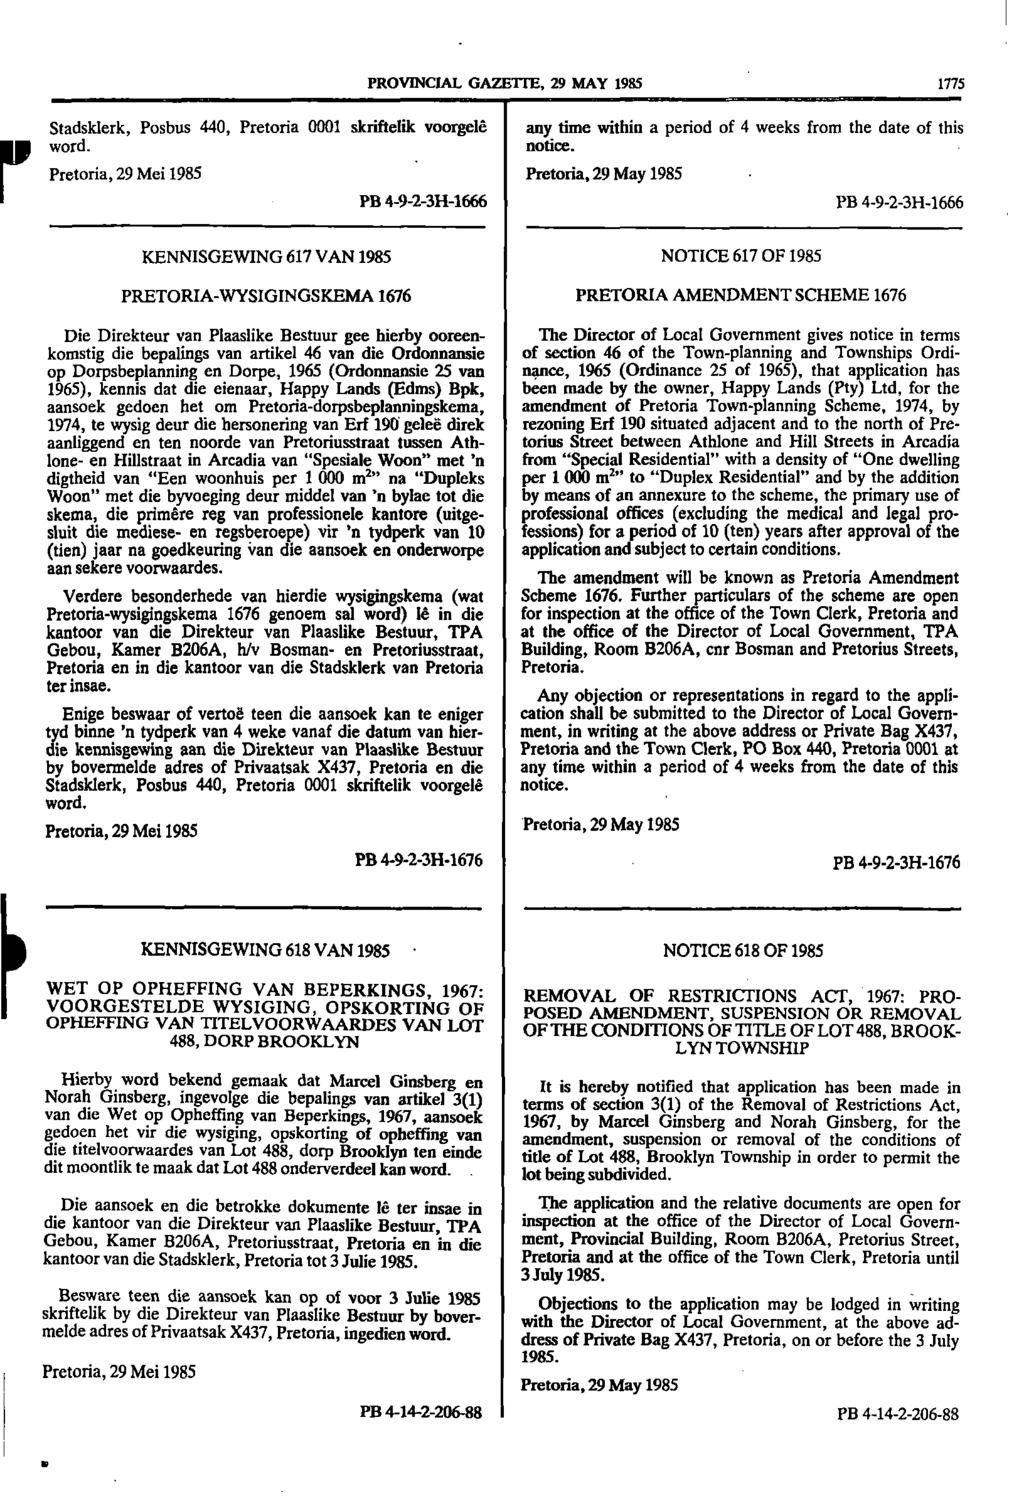 1 PROVNCAL GAZETTE, 29 MAY 1985 1775 r word Stadsklerk, Posbus 440, Pretoria 0001 skriftelik voorgele any time within a period of 4 weeks from the date of this notice Pretoria, 29 Mei 1985 Pretoria,